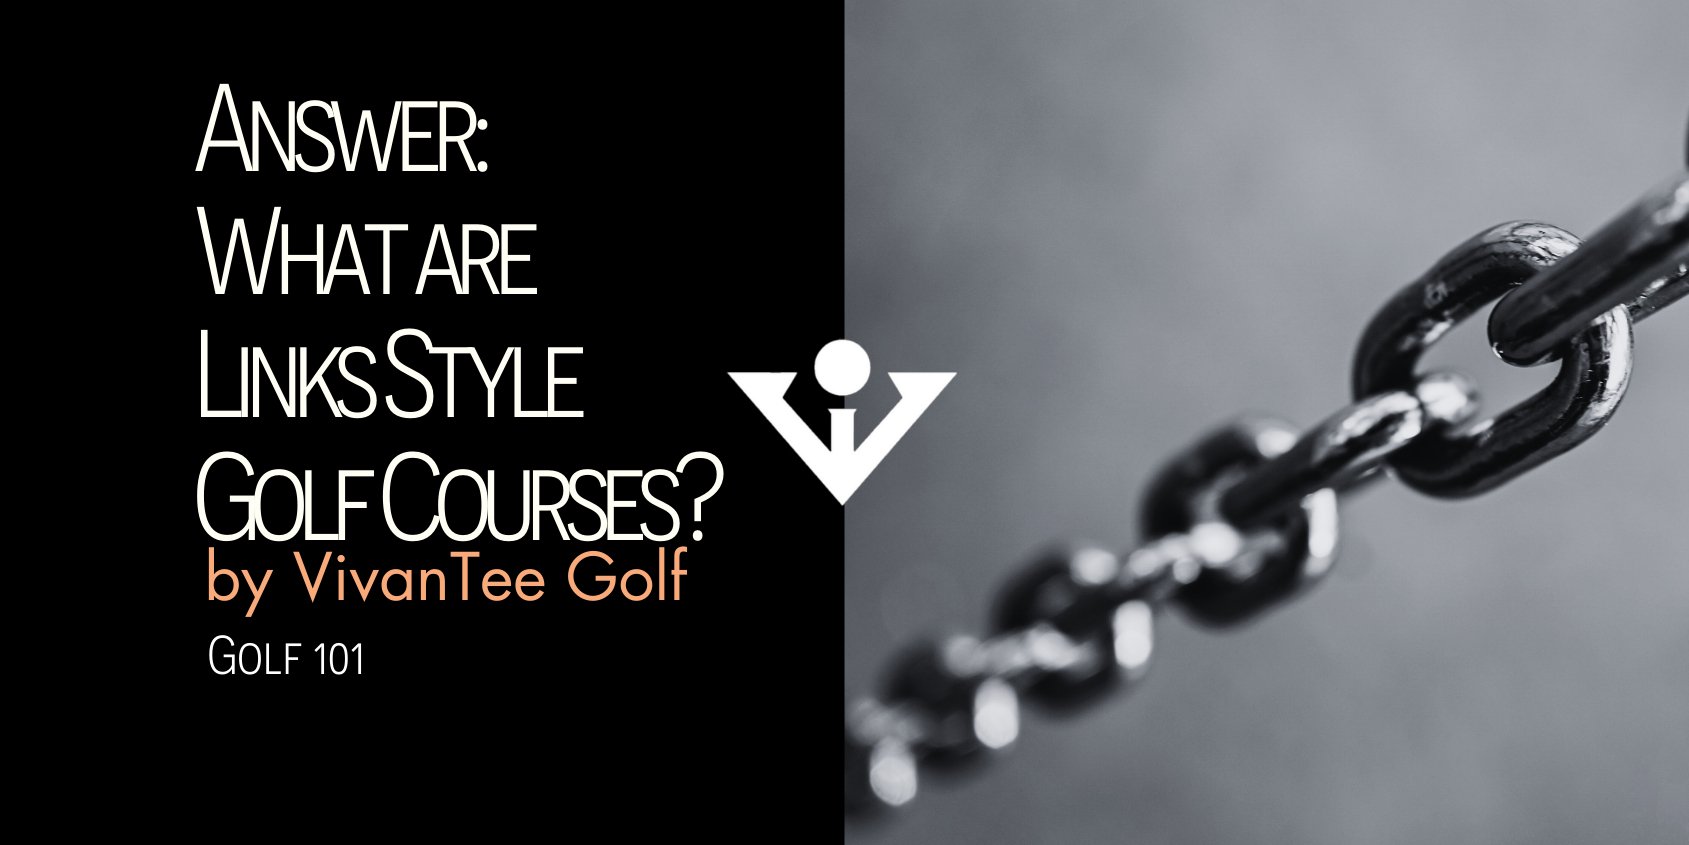 An image of a chain link fence in monochrome in VivanTee Golf's signature blog banner style for our blog on what are links style golf courses?